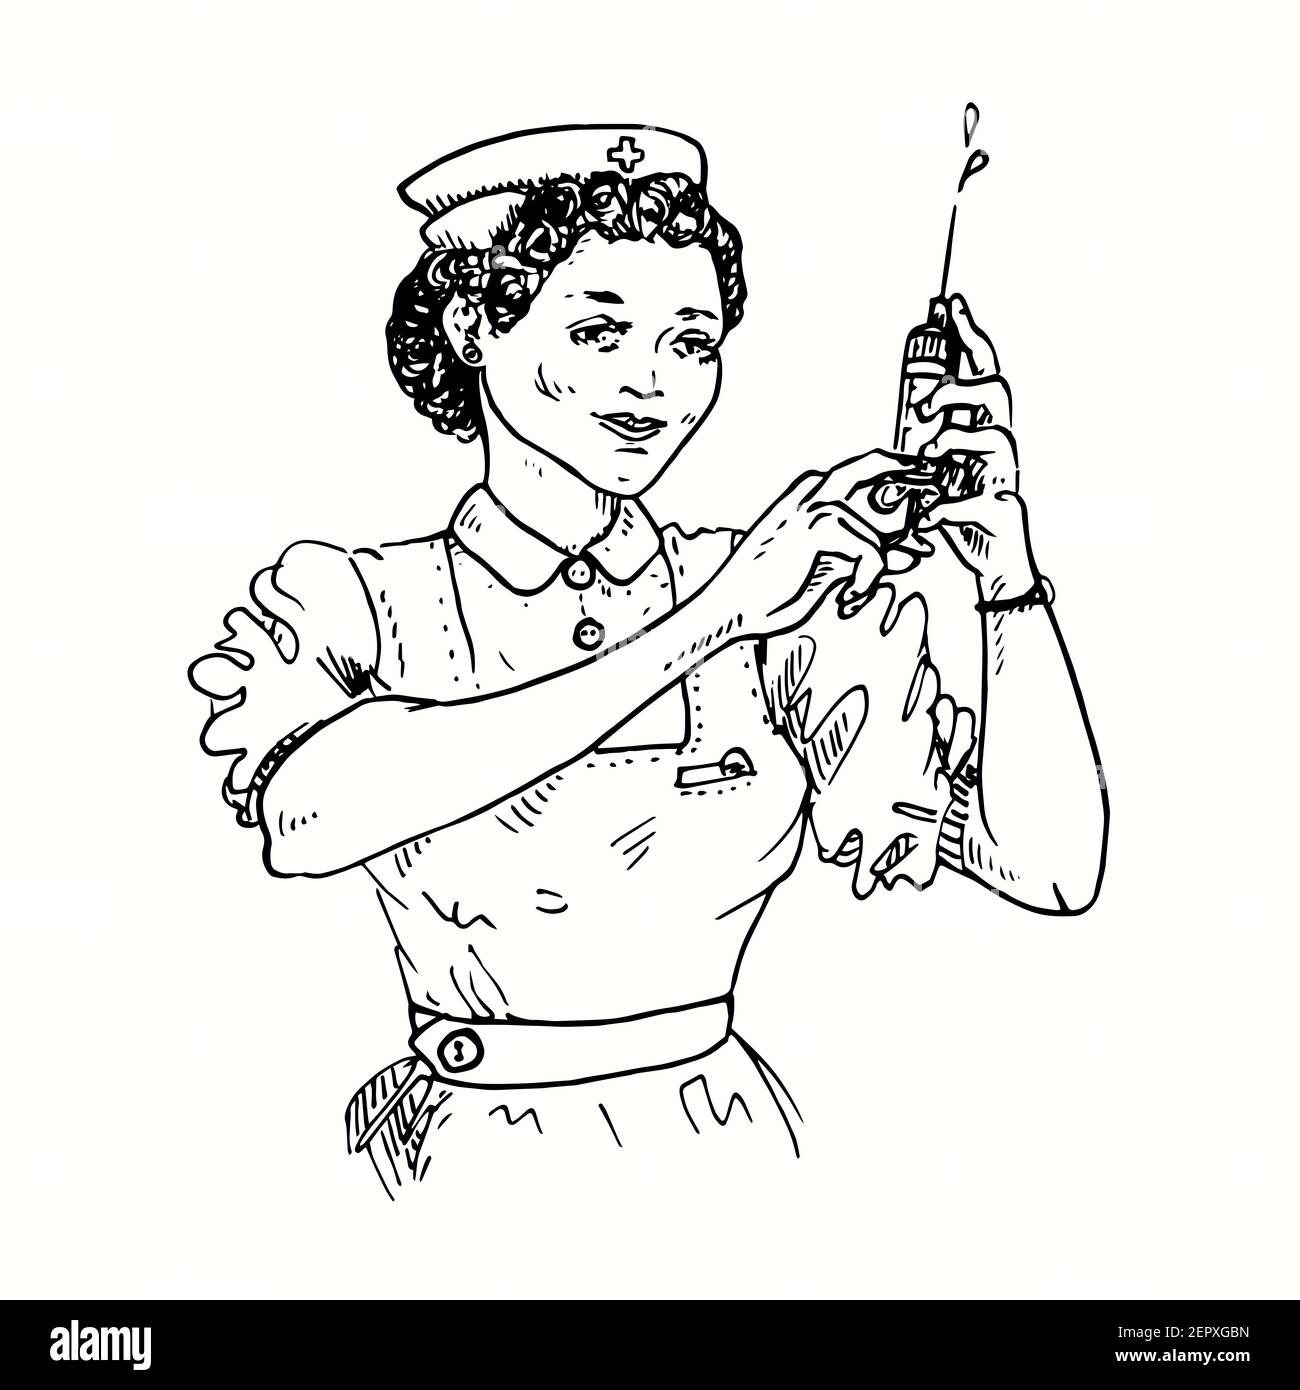 Nurse getting ready to inject, getting ready to vaccinate . Ink black and white drawing. Stock Photo